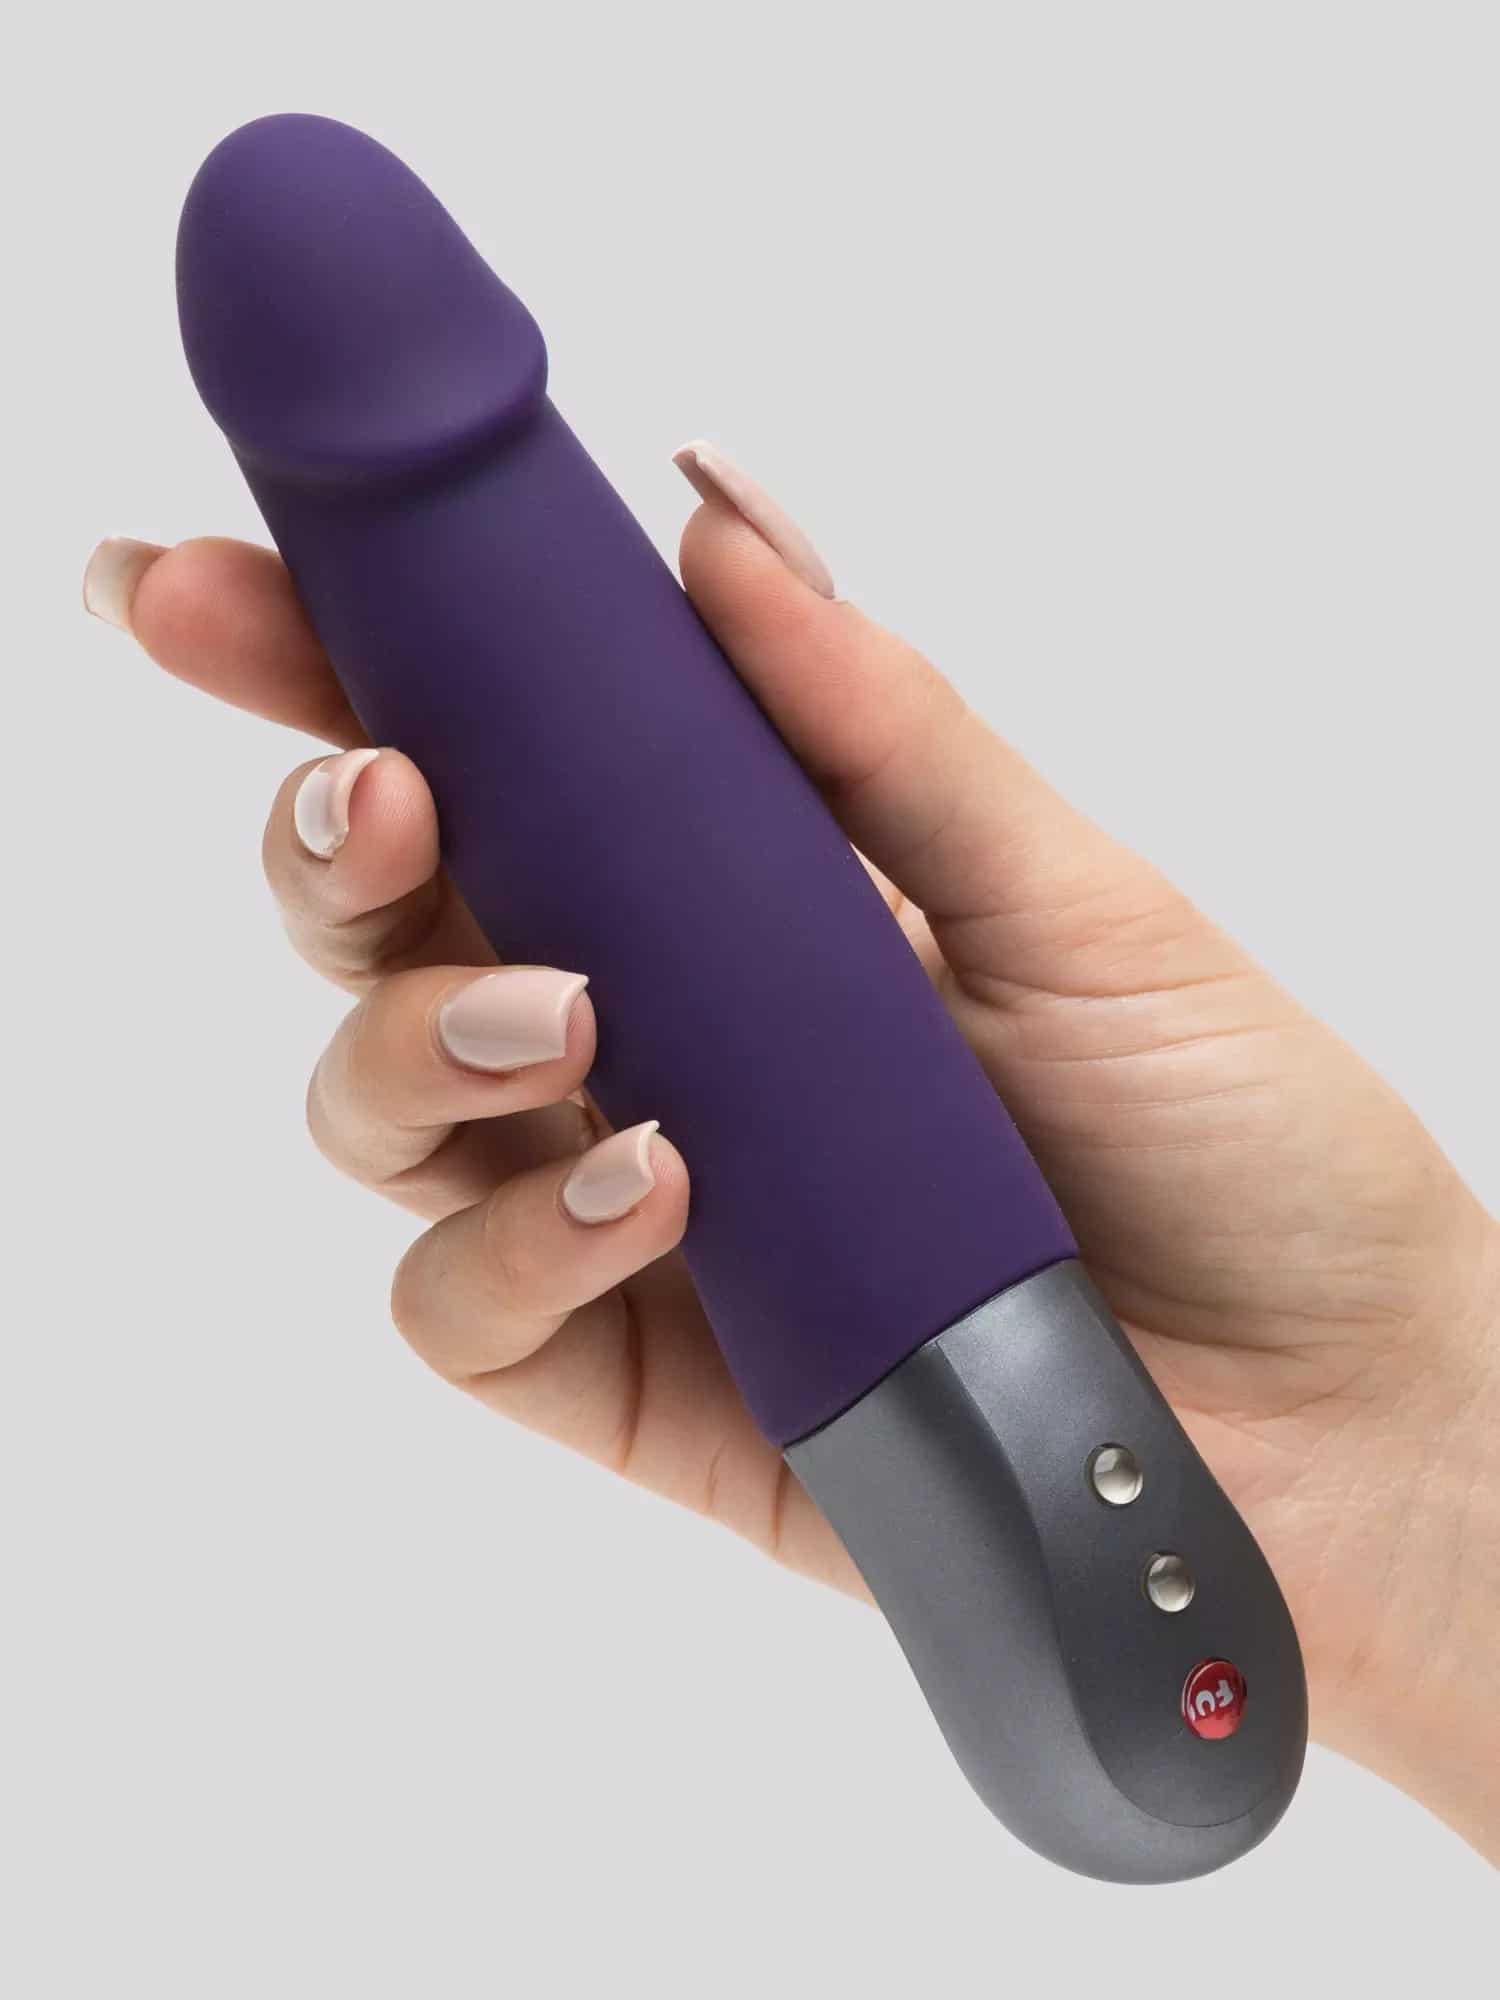 Fun Factory Stronic Real Rechargeable Realistic Thrusting Vibrator. Slide 6